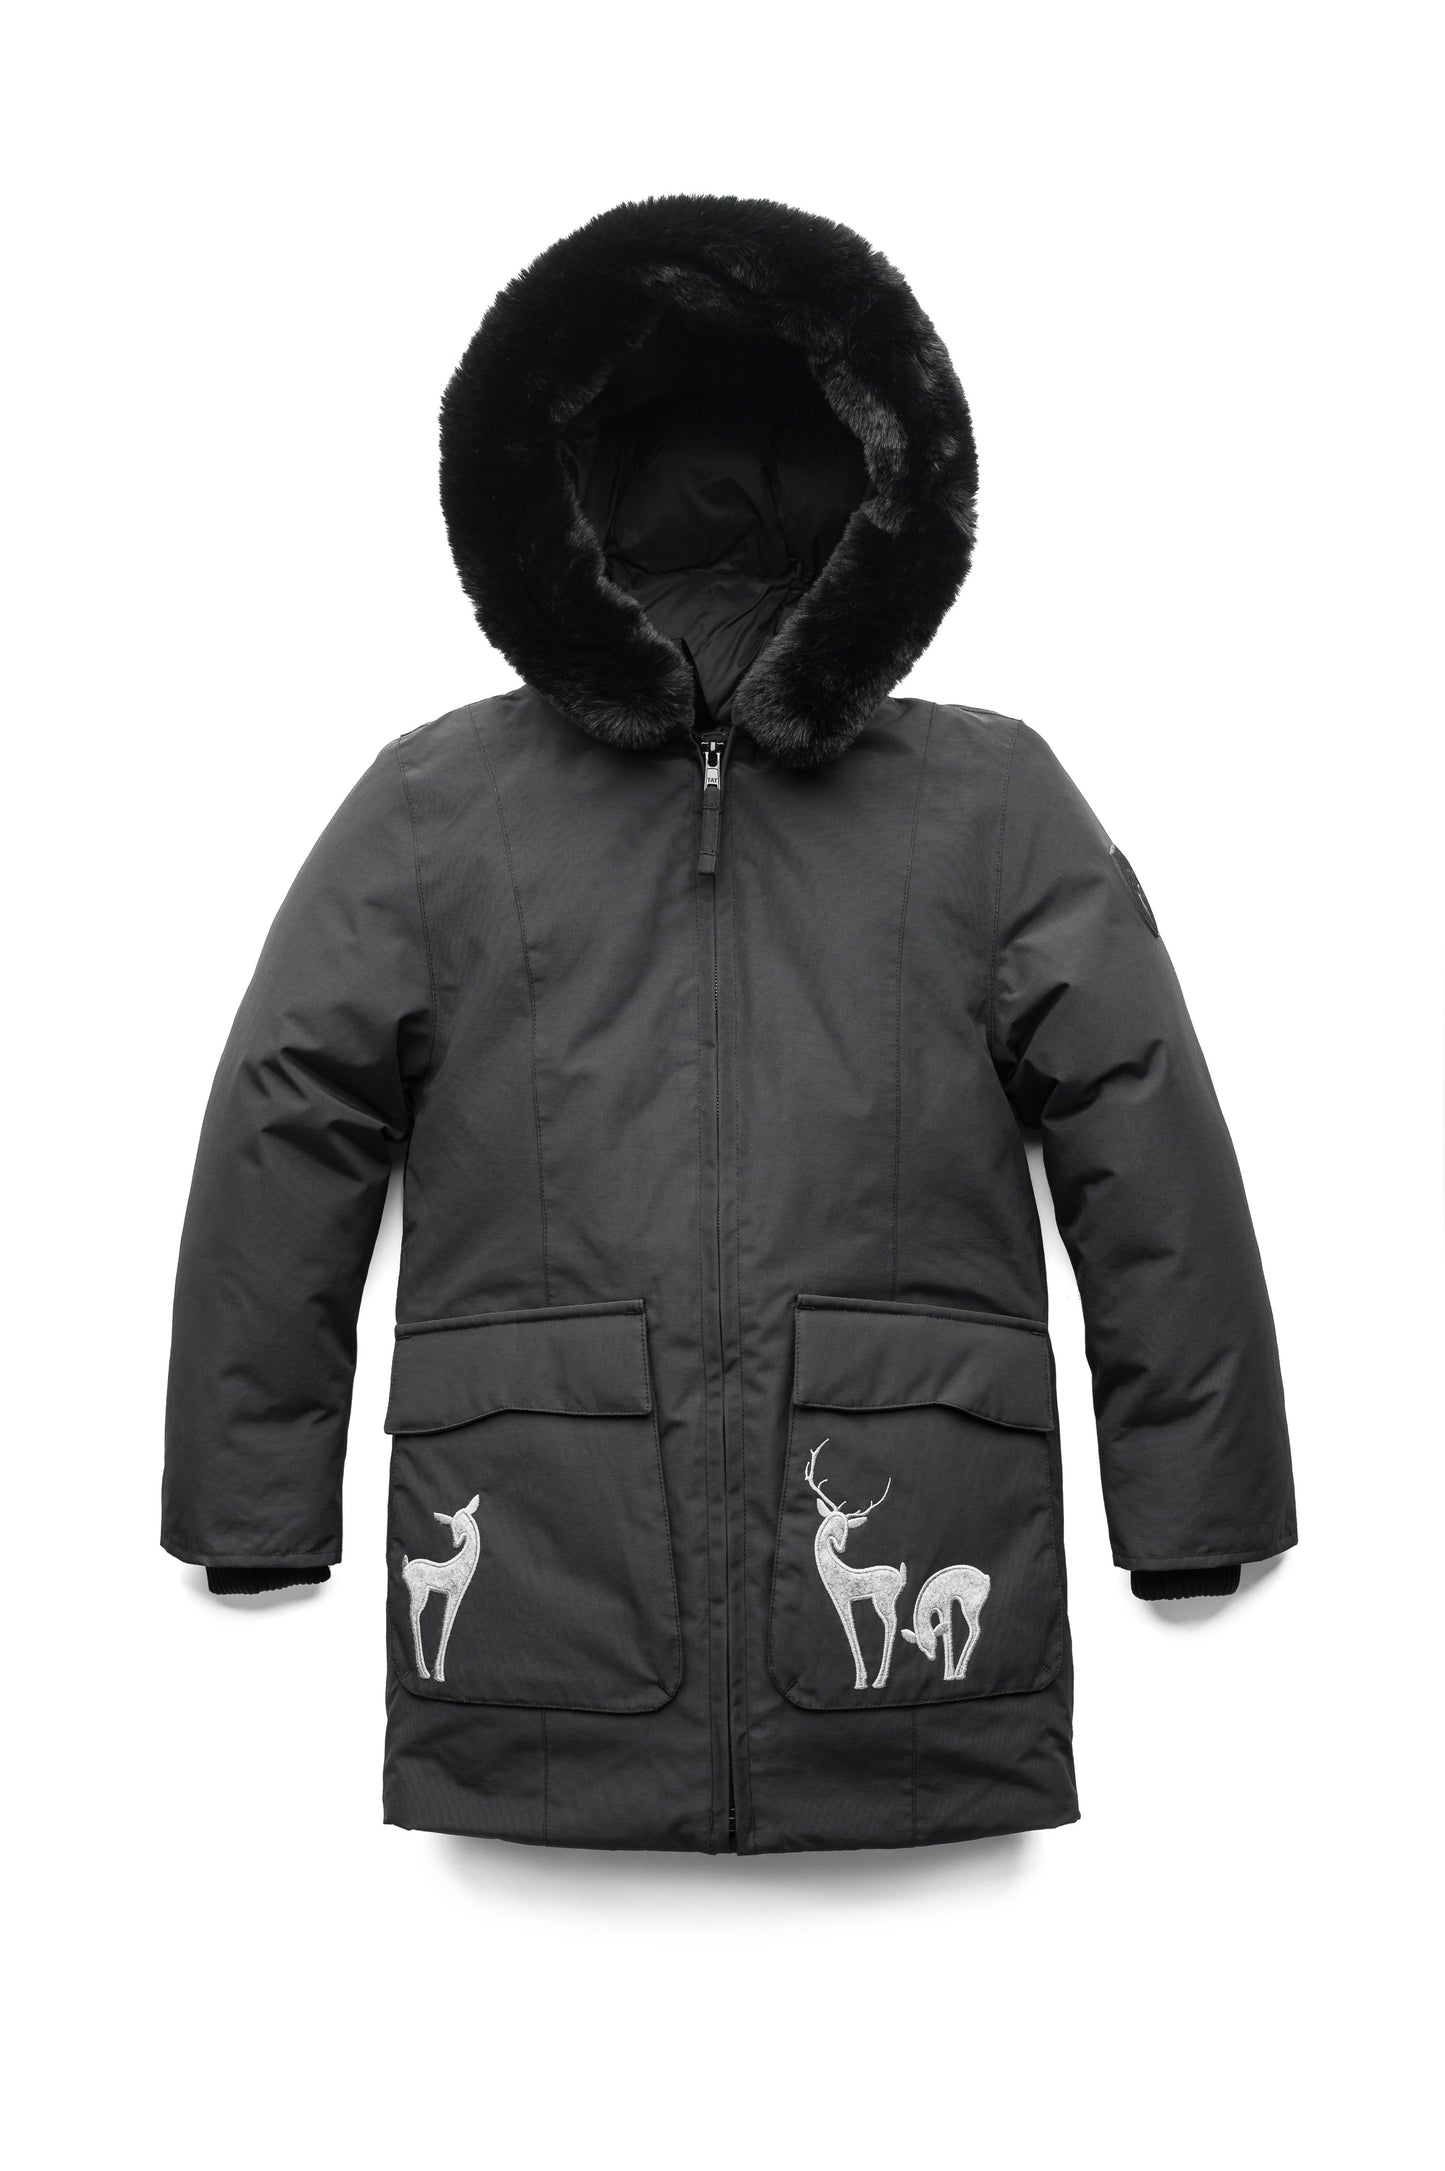 Kid's knee length down filled parka with deer applique detailing on the front patch pockets in Cy Black